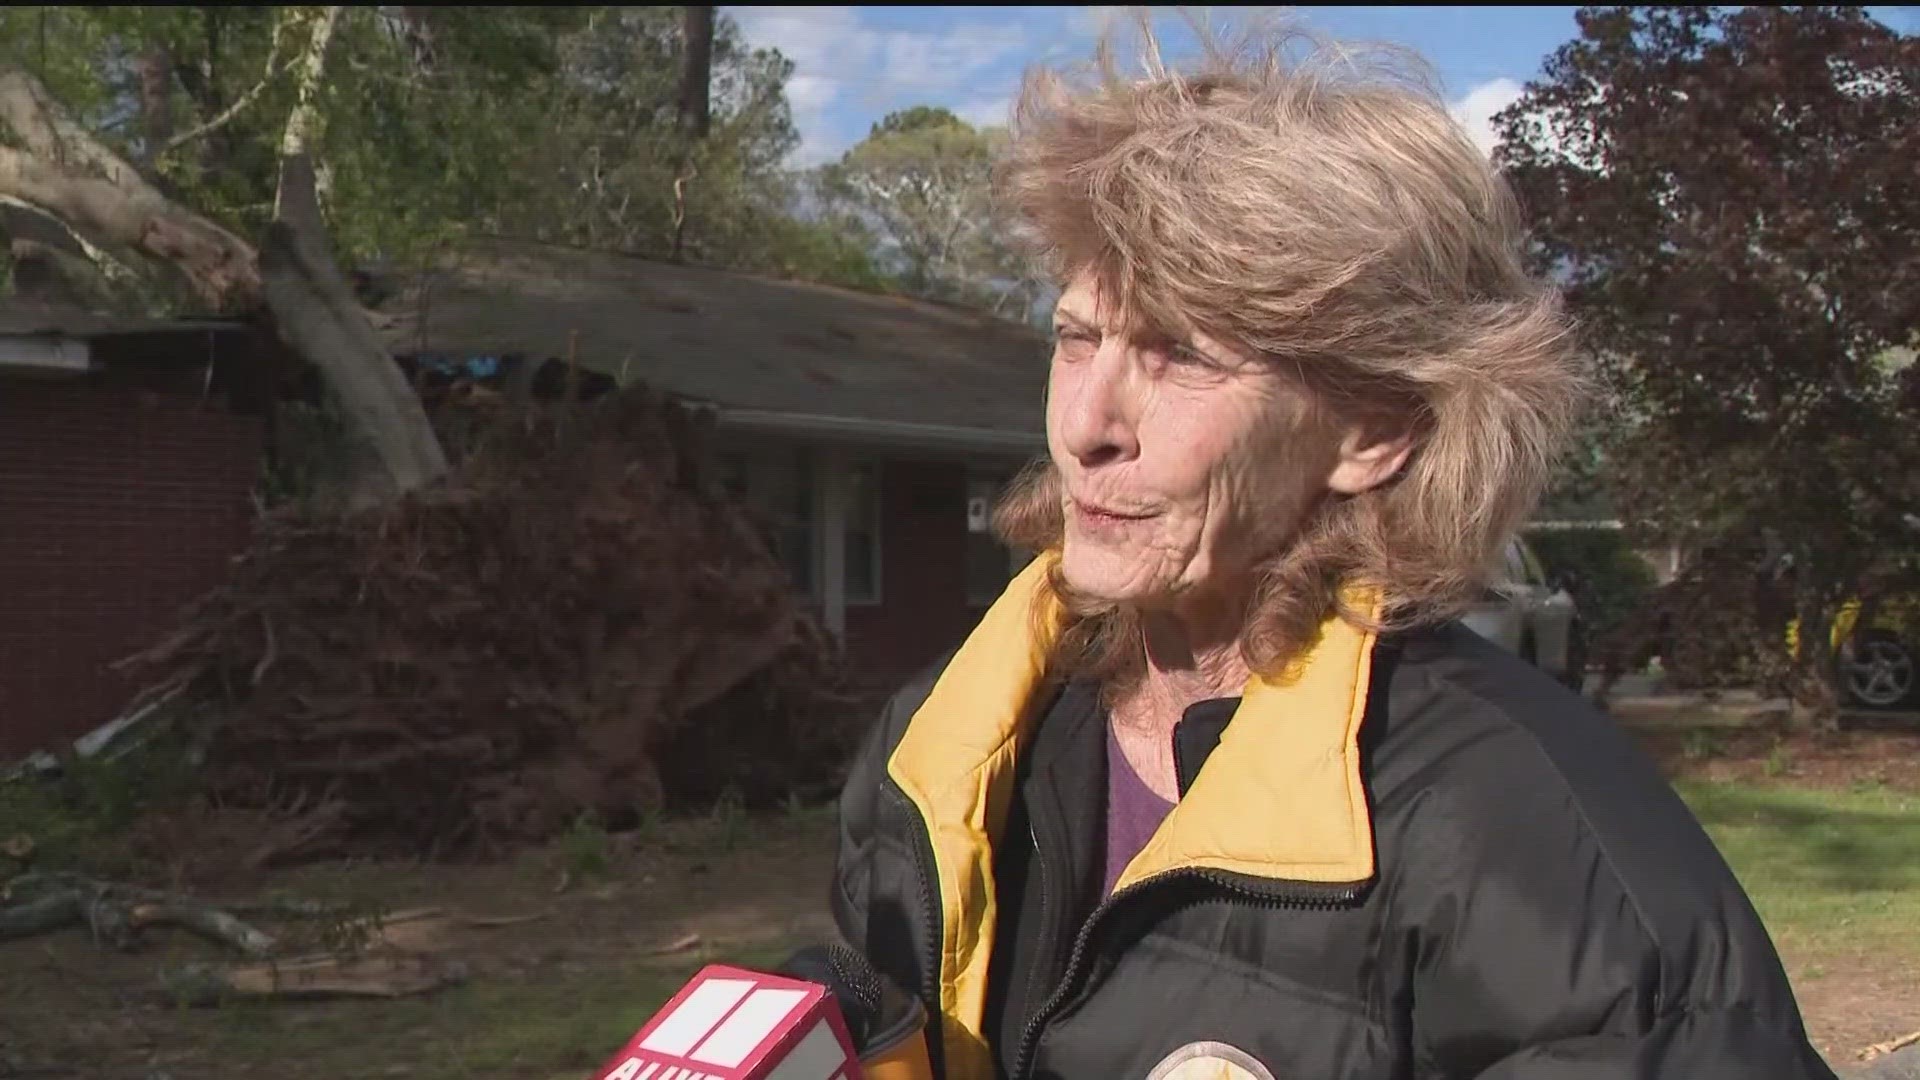 One Conyers woman described the terrifying moment a large tree came crashing down into her home. But storm debris isn't the only thing she's had to deal with.